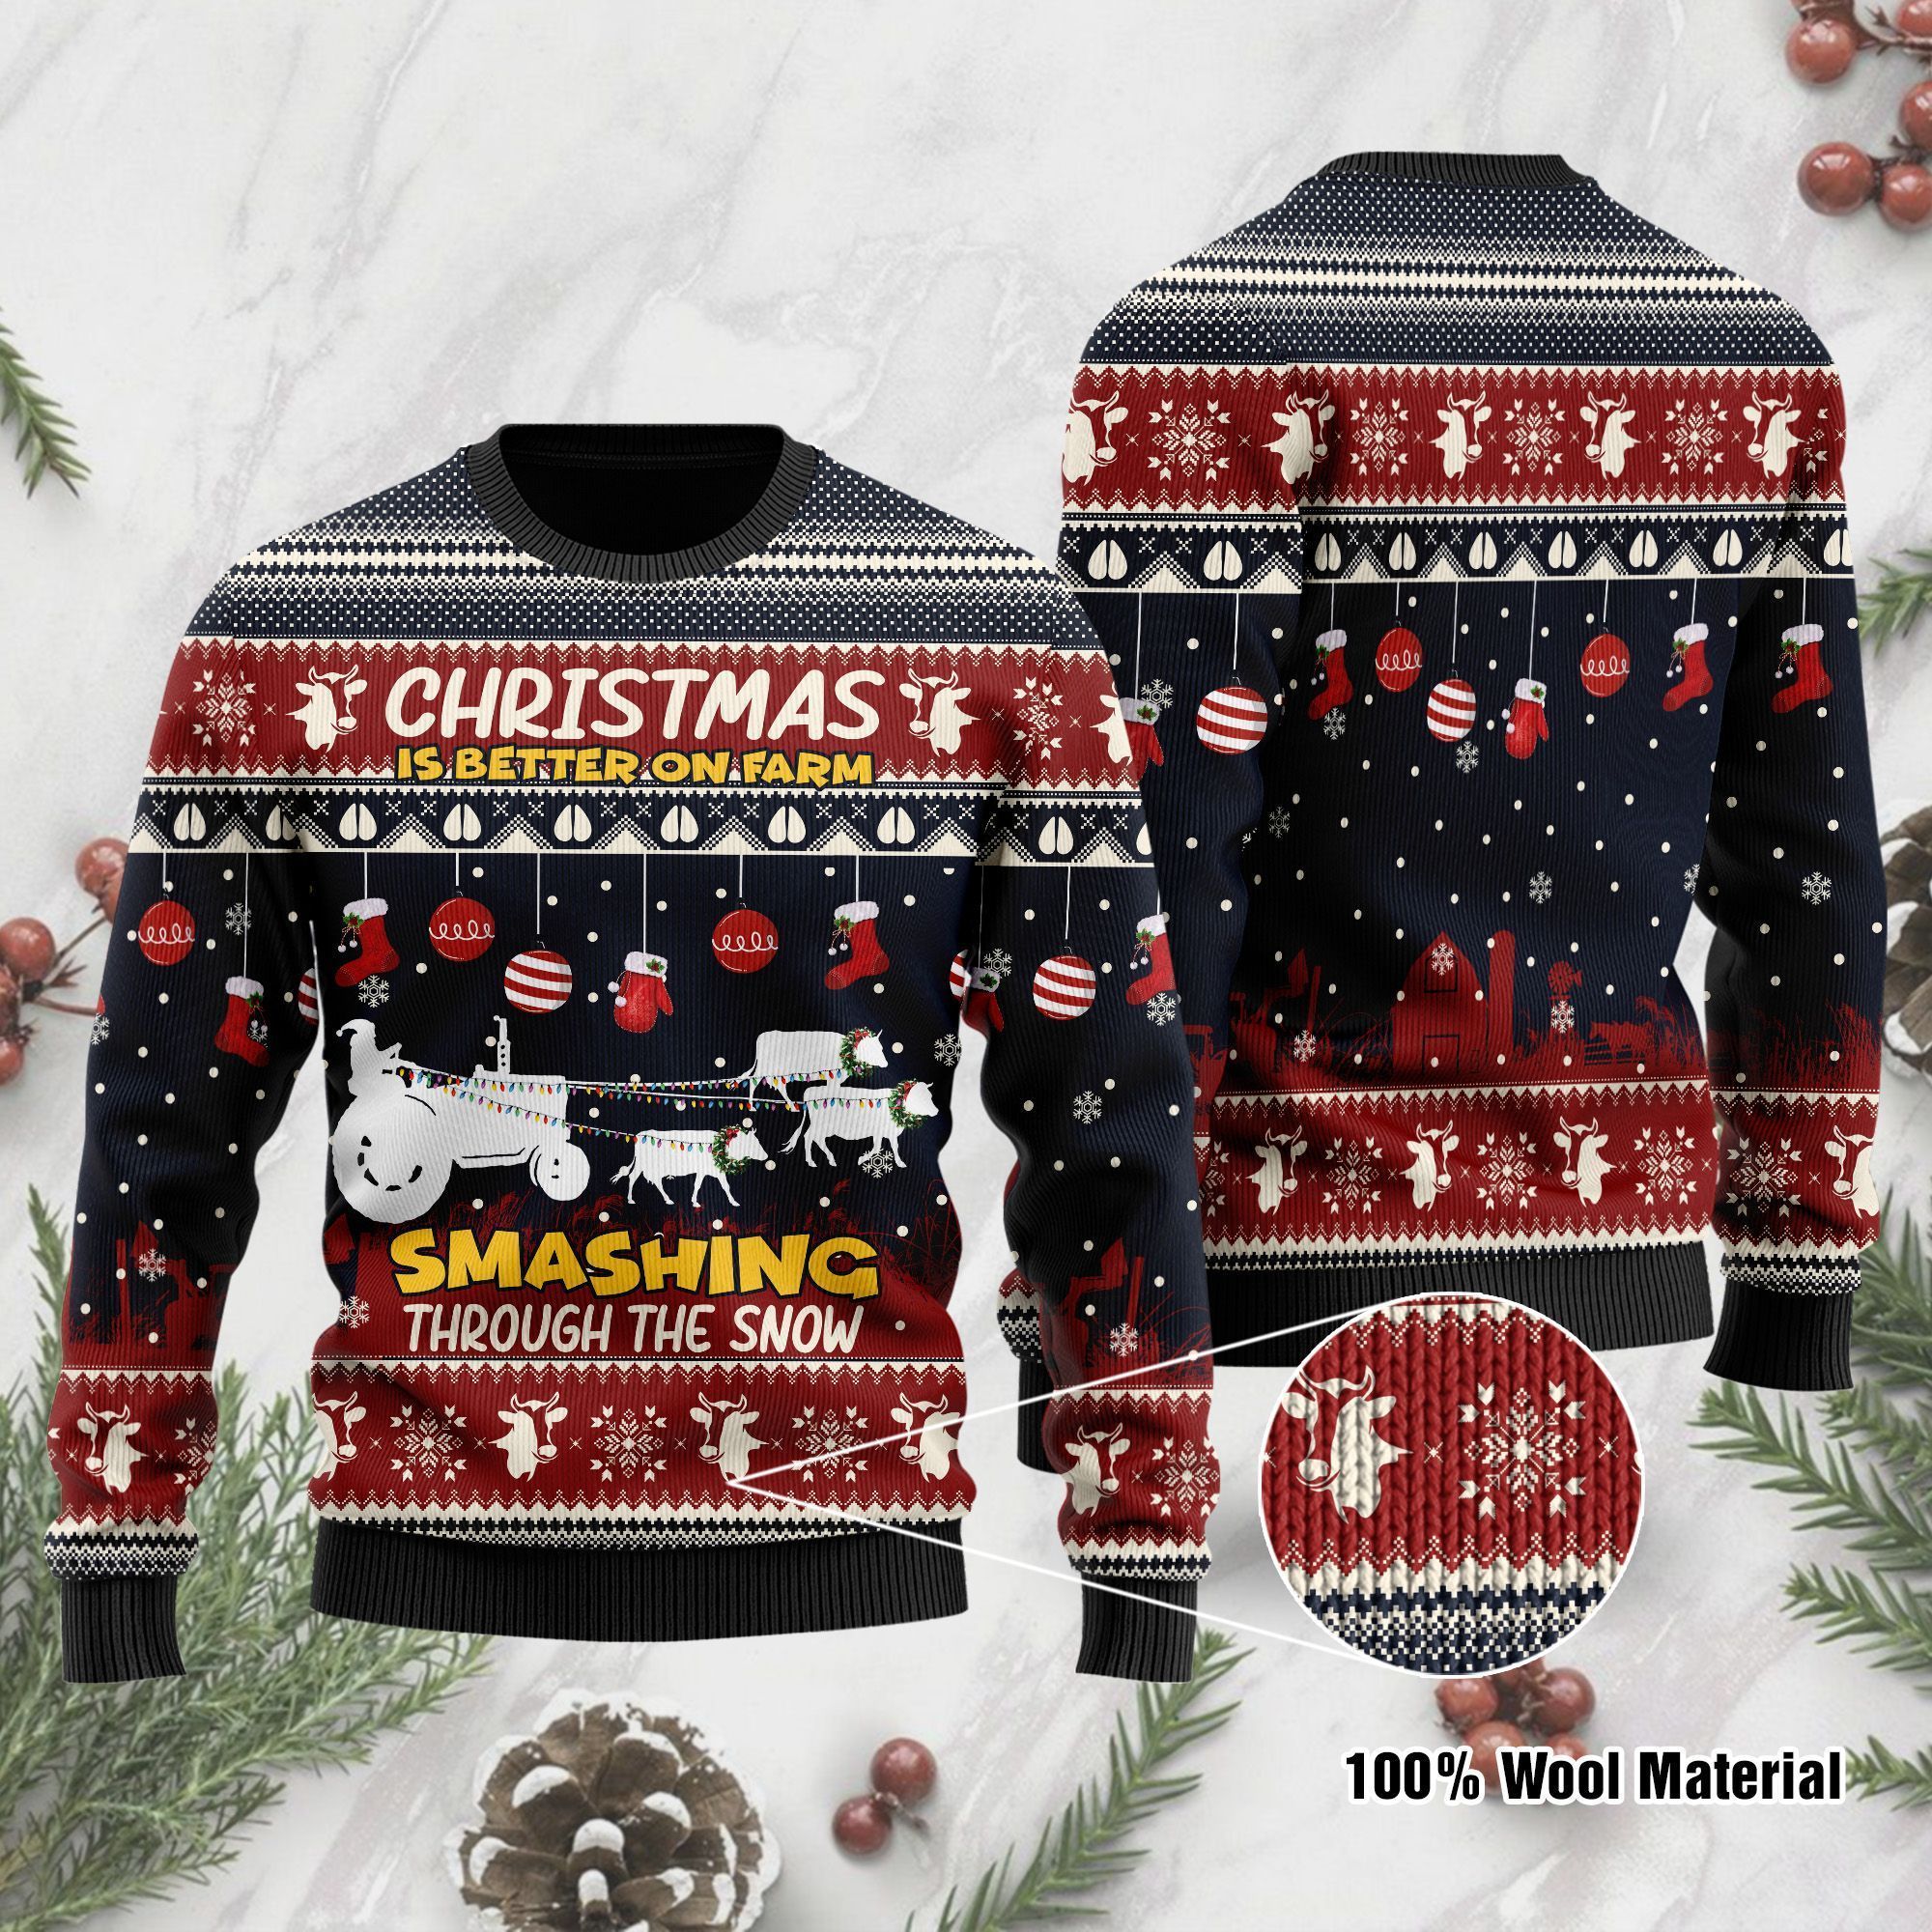 Santa Claus With Reindeer Cow Ugly Sweater With Sayings Christmas Is Better On Farm Smashing Through The Snow For Farmer